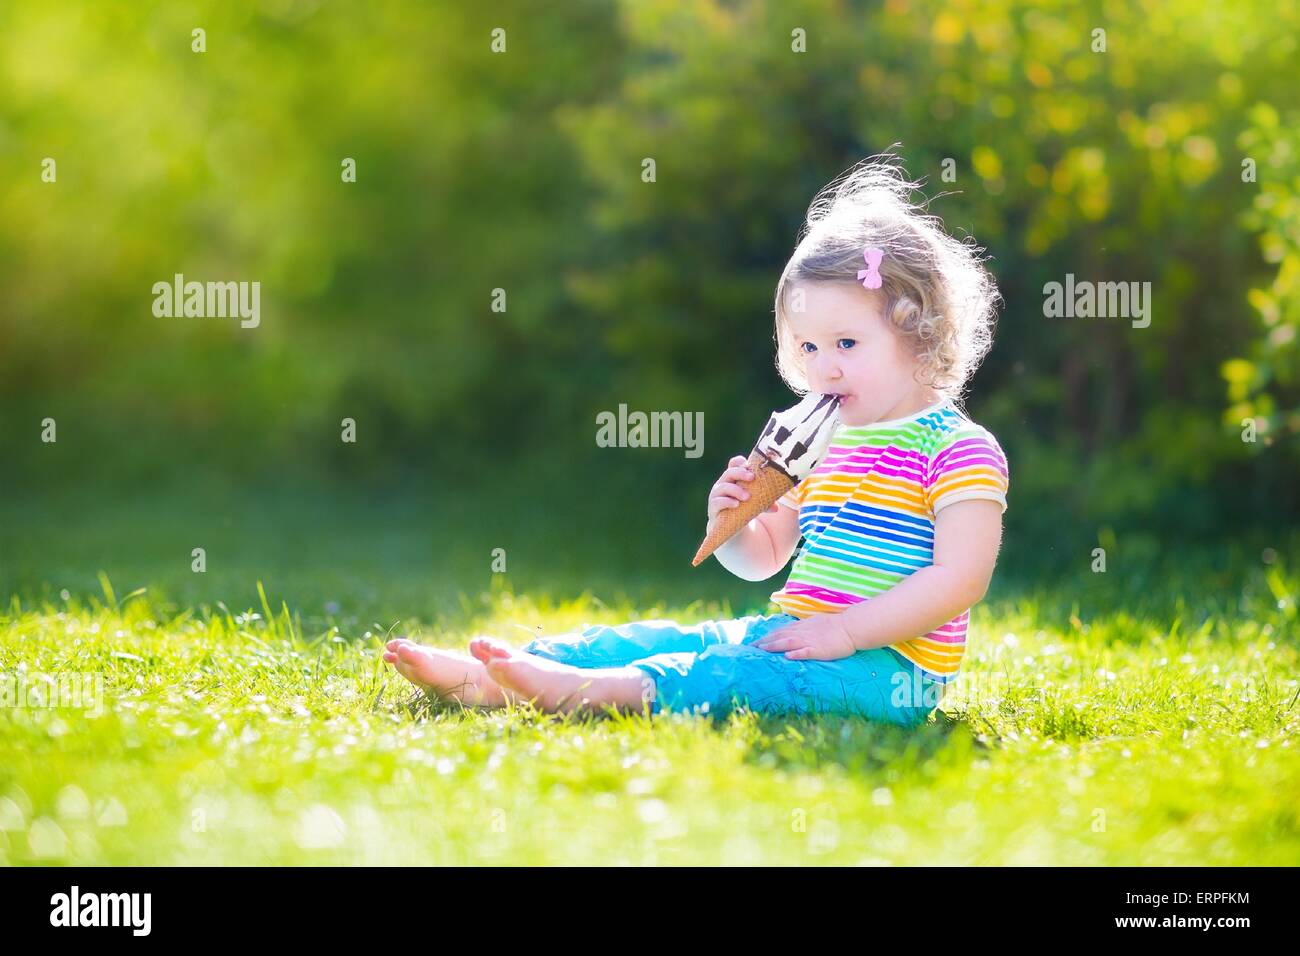 Funny toddler girl with curly hair wearing colorful summer shirt and blue jeans sitting on green lawn eating ice cream cone Stock Photo